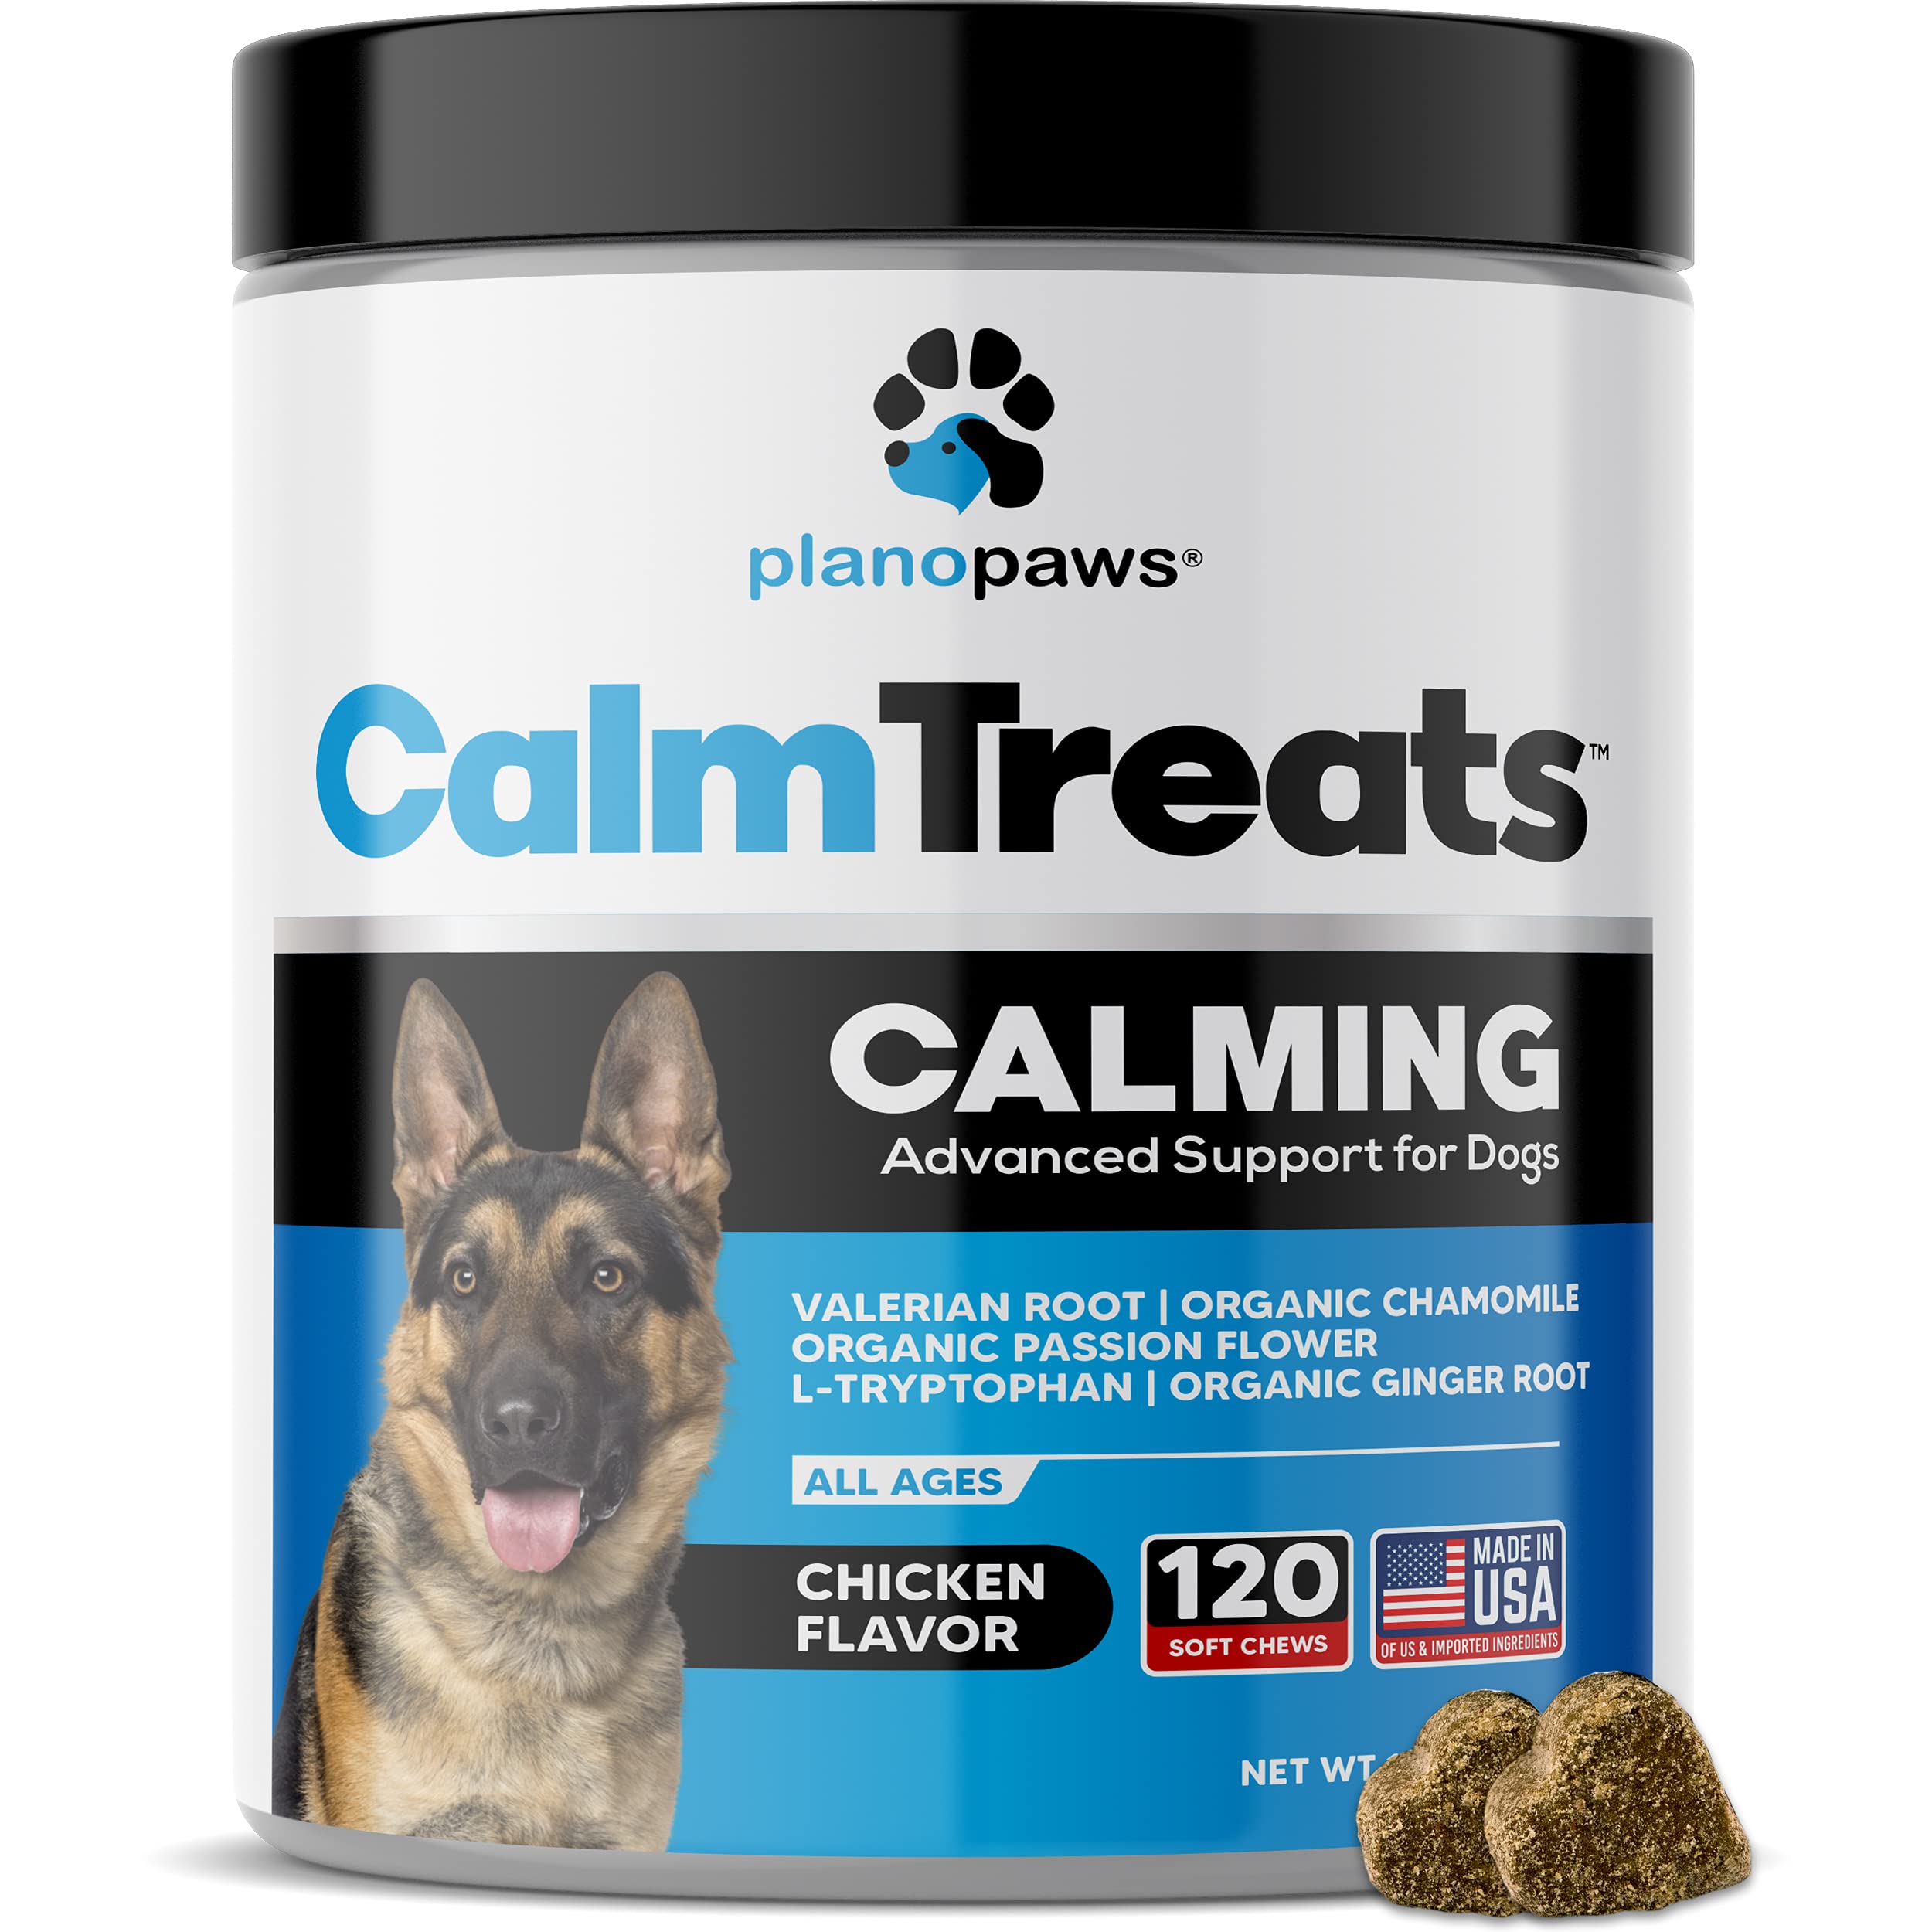 What is the Best Calming Treat for Dogs?